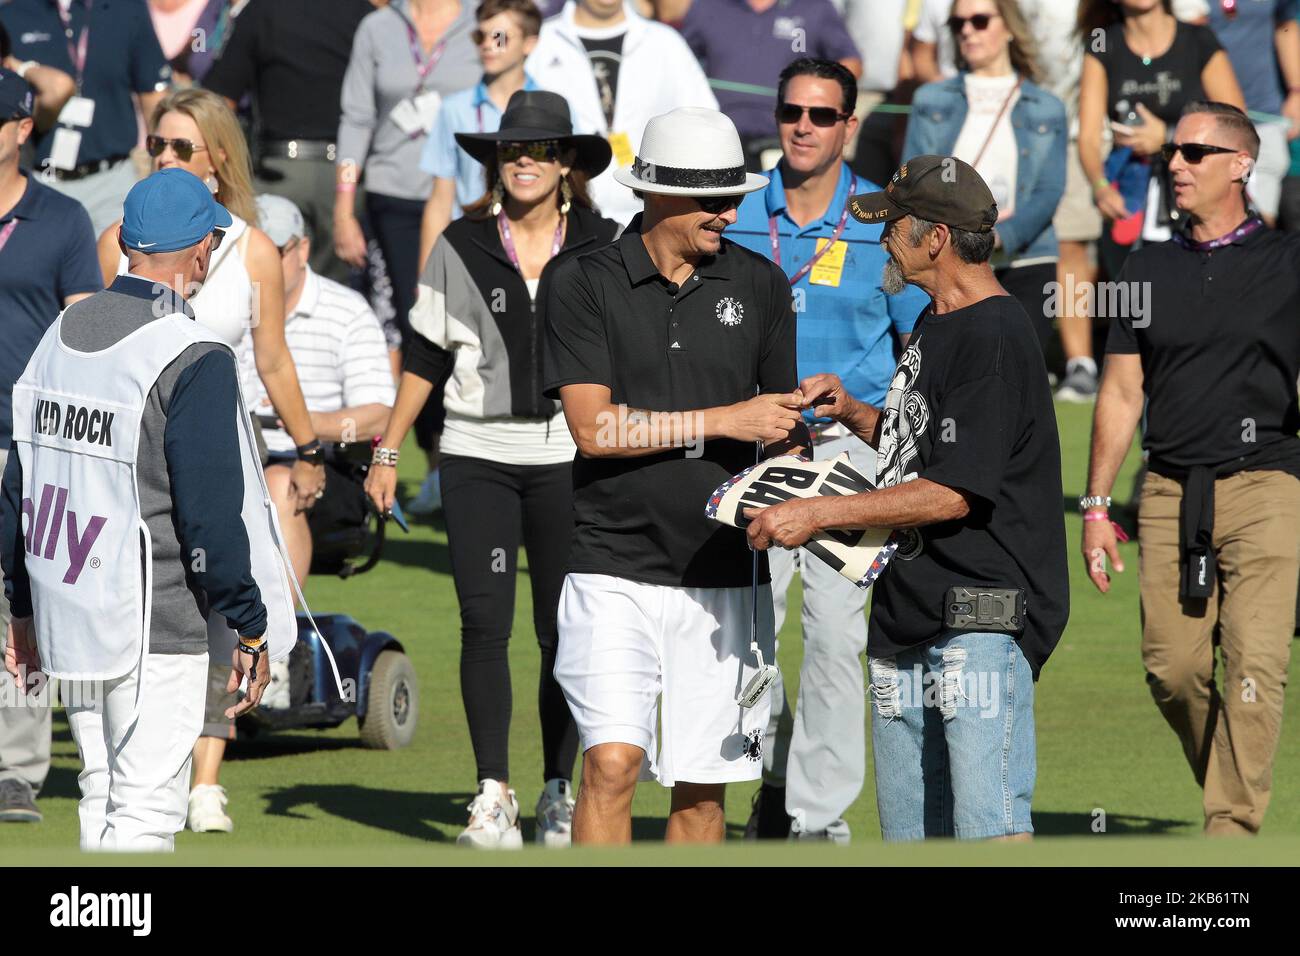 Michigan native Kid Rock sings an autograph during a celebrity shootout at the conclusion of the second round of The Ally Challenge presented by McLaren at Warwick Hills Golf & Country Club, Grand Blanc, MI, USA Saturday, September 14, 2019. (Photo by Jorge Lemus/NurPhoto) Stock Photo